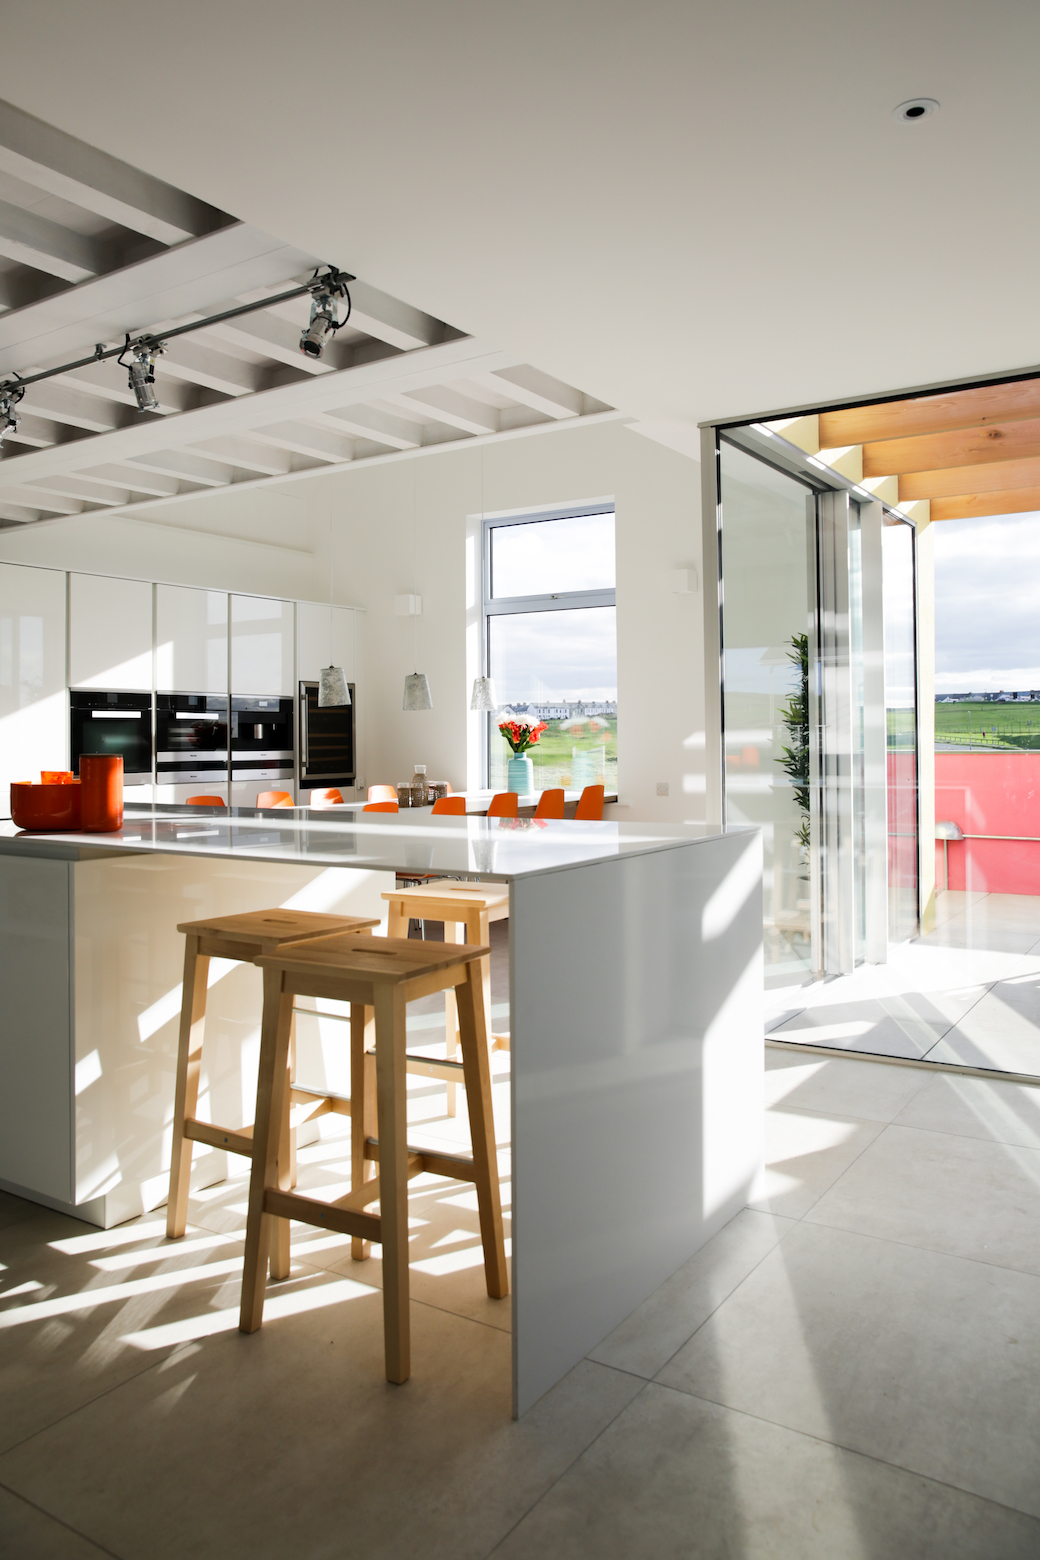 Ash Row, Cornwall, by Hogarth Architects, marketed by Aucoot.